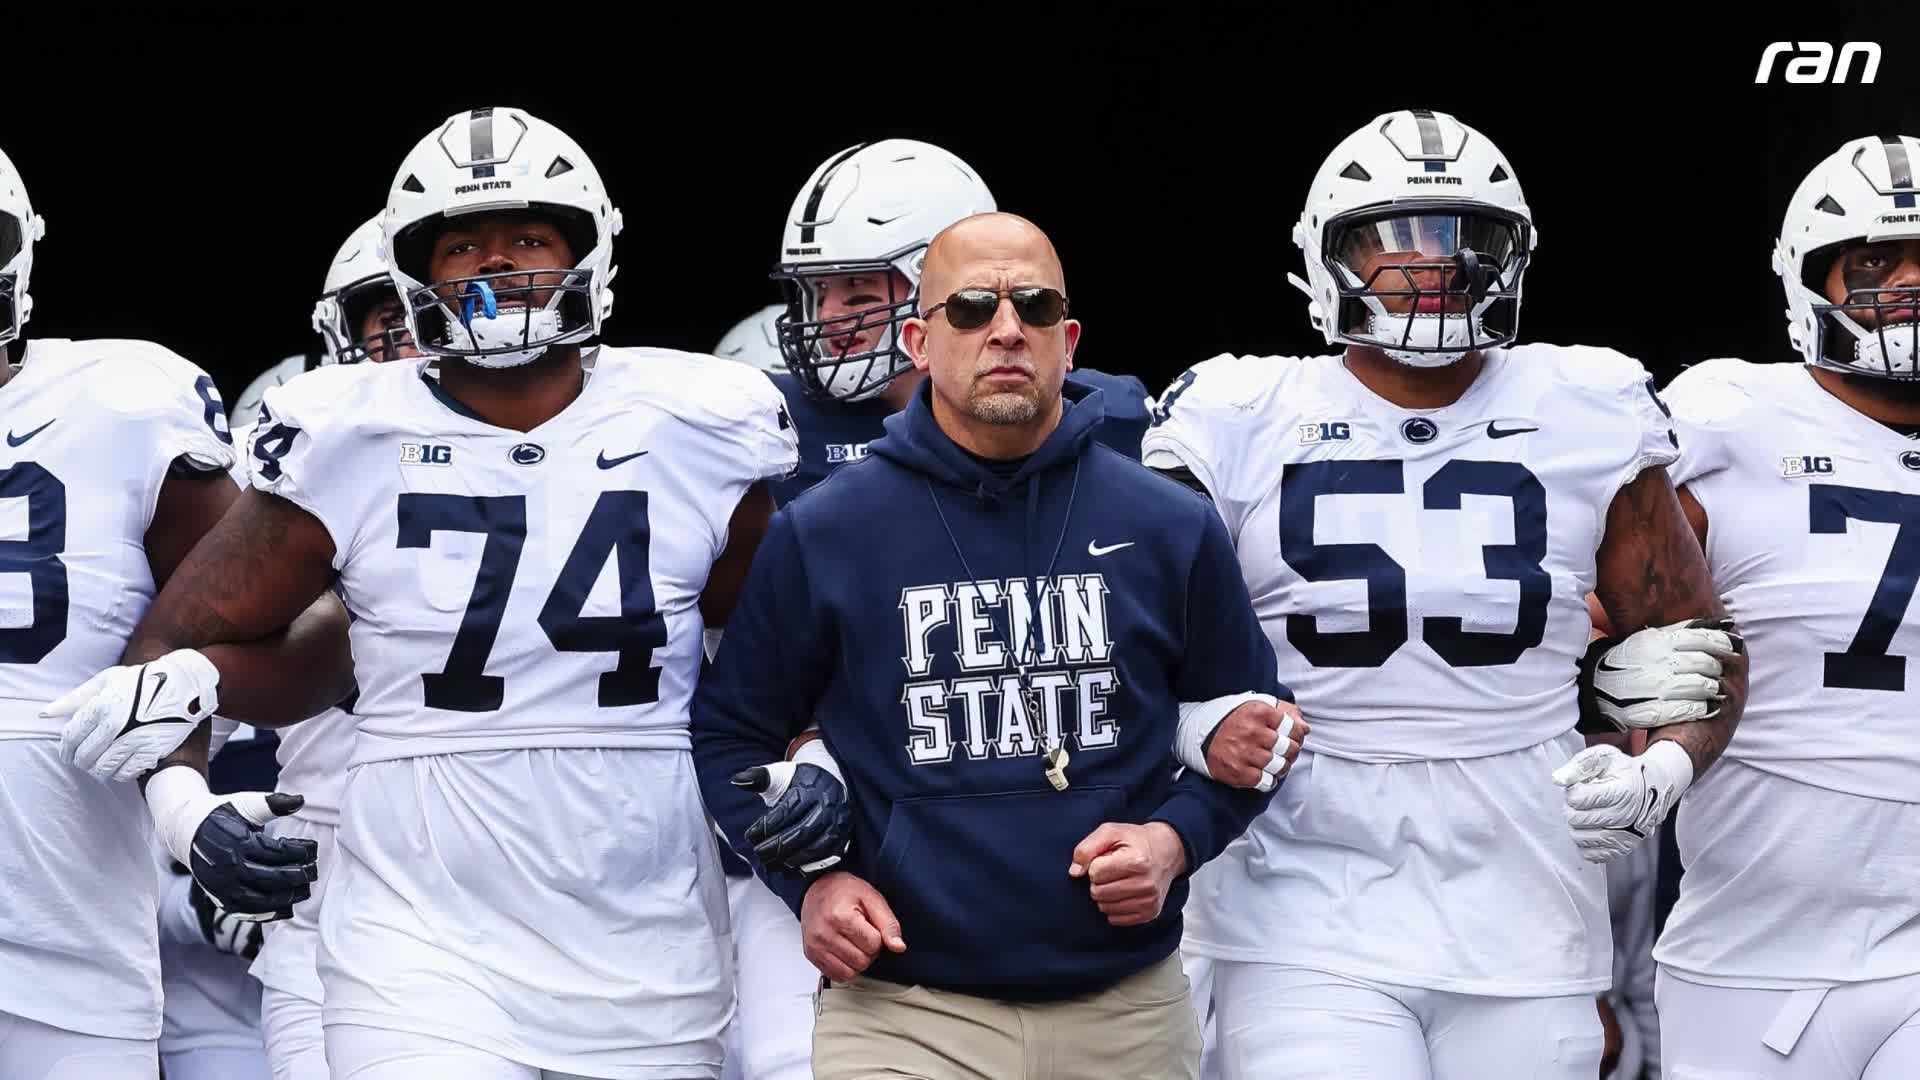 NFL calls: Penn State coach in draft day stress